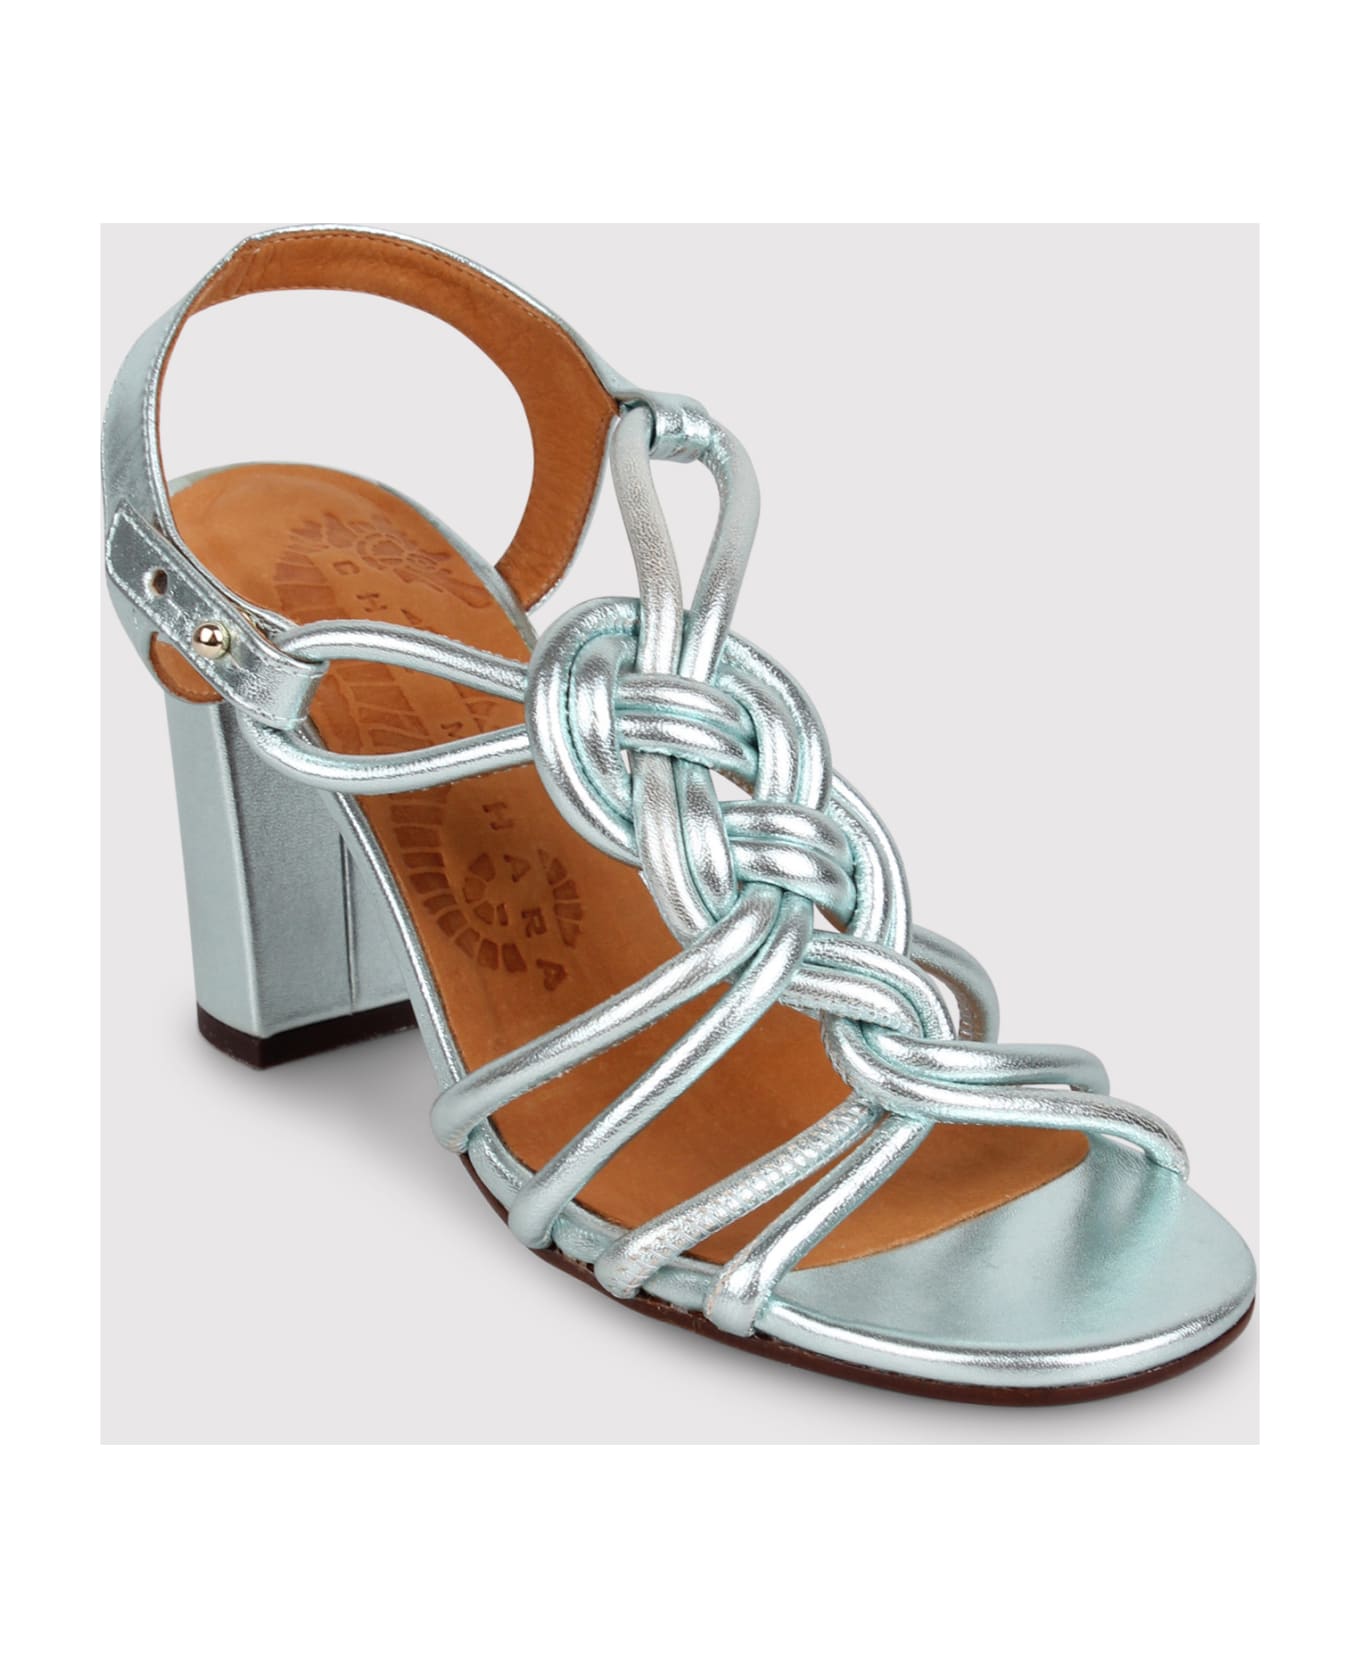 Chie Mihara Bane 85mm Leather Sandals